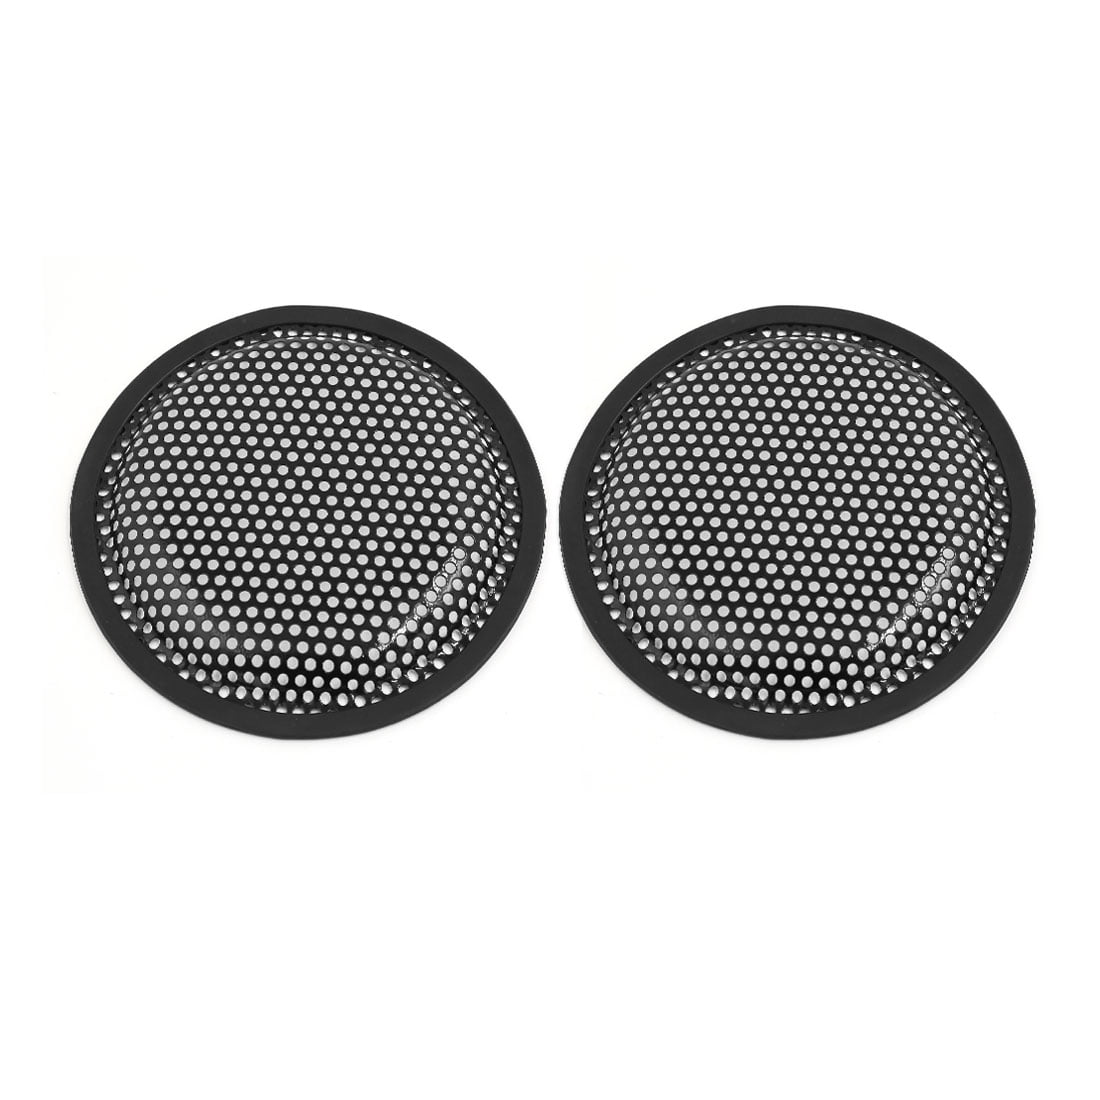 Black Mesh Cover Waffle Speaker Grill Protect Guard Car Audio G